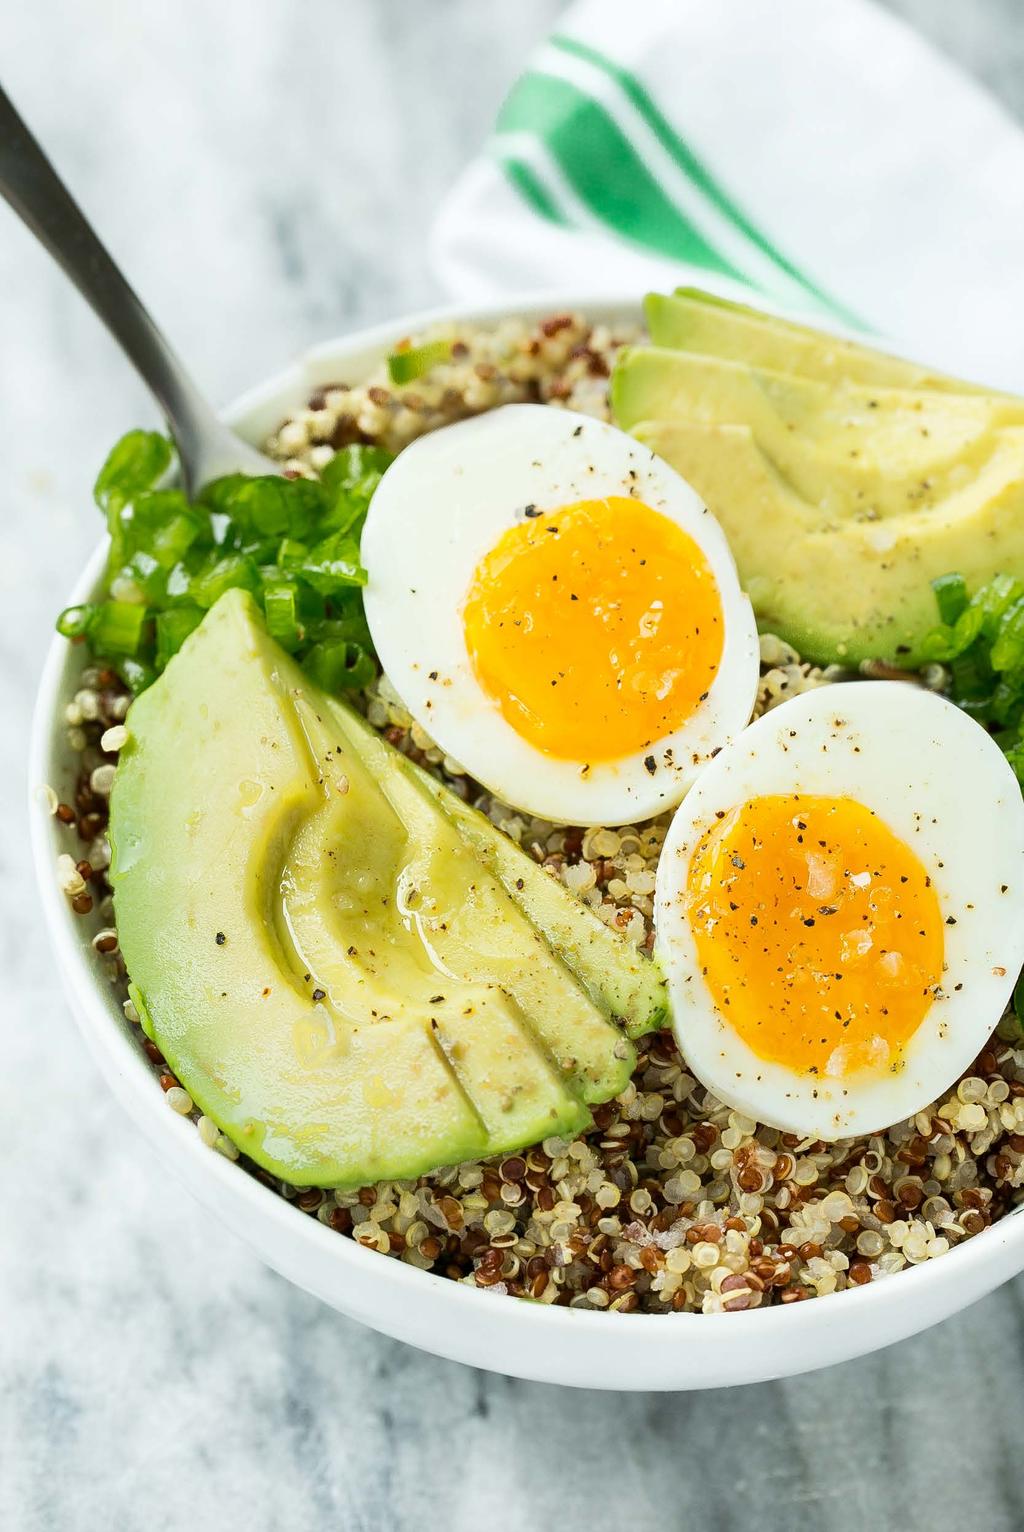 Savory Breakfast Bowls 21. Quinoa Quick-Grab Bowl Prepare the quinoa, eggs and green onion jalapeno relish the night before; in the morning just assemble and add avocado!